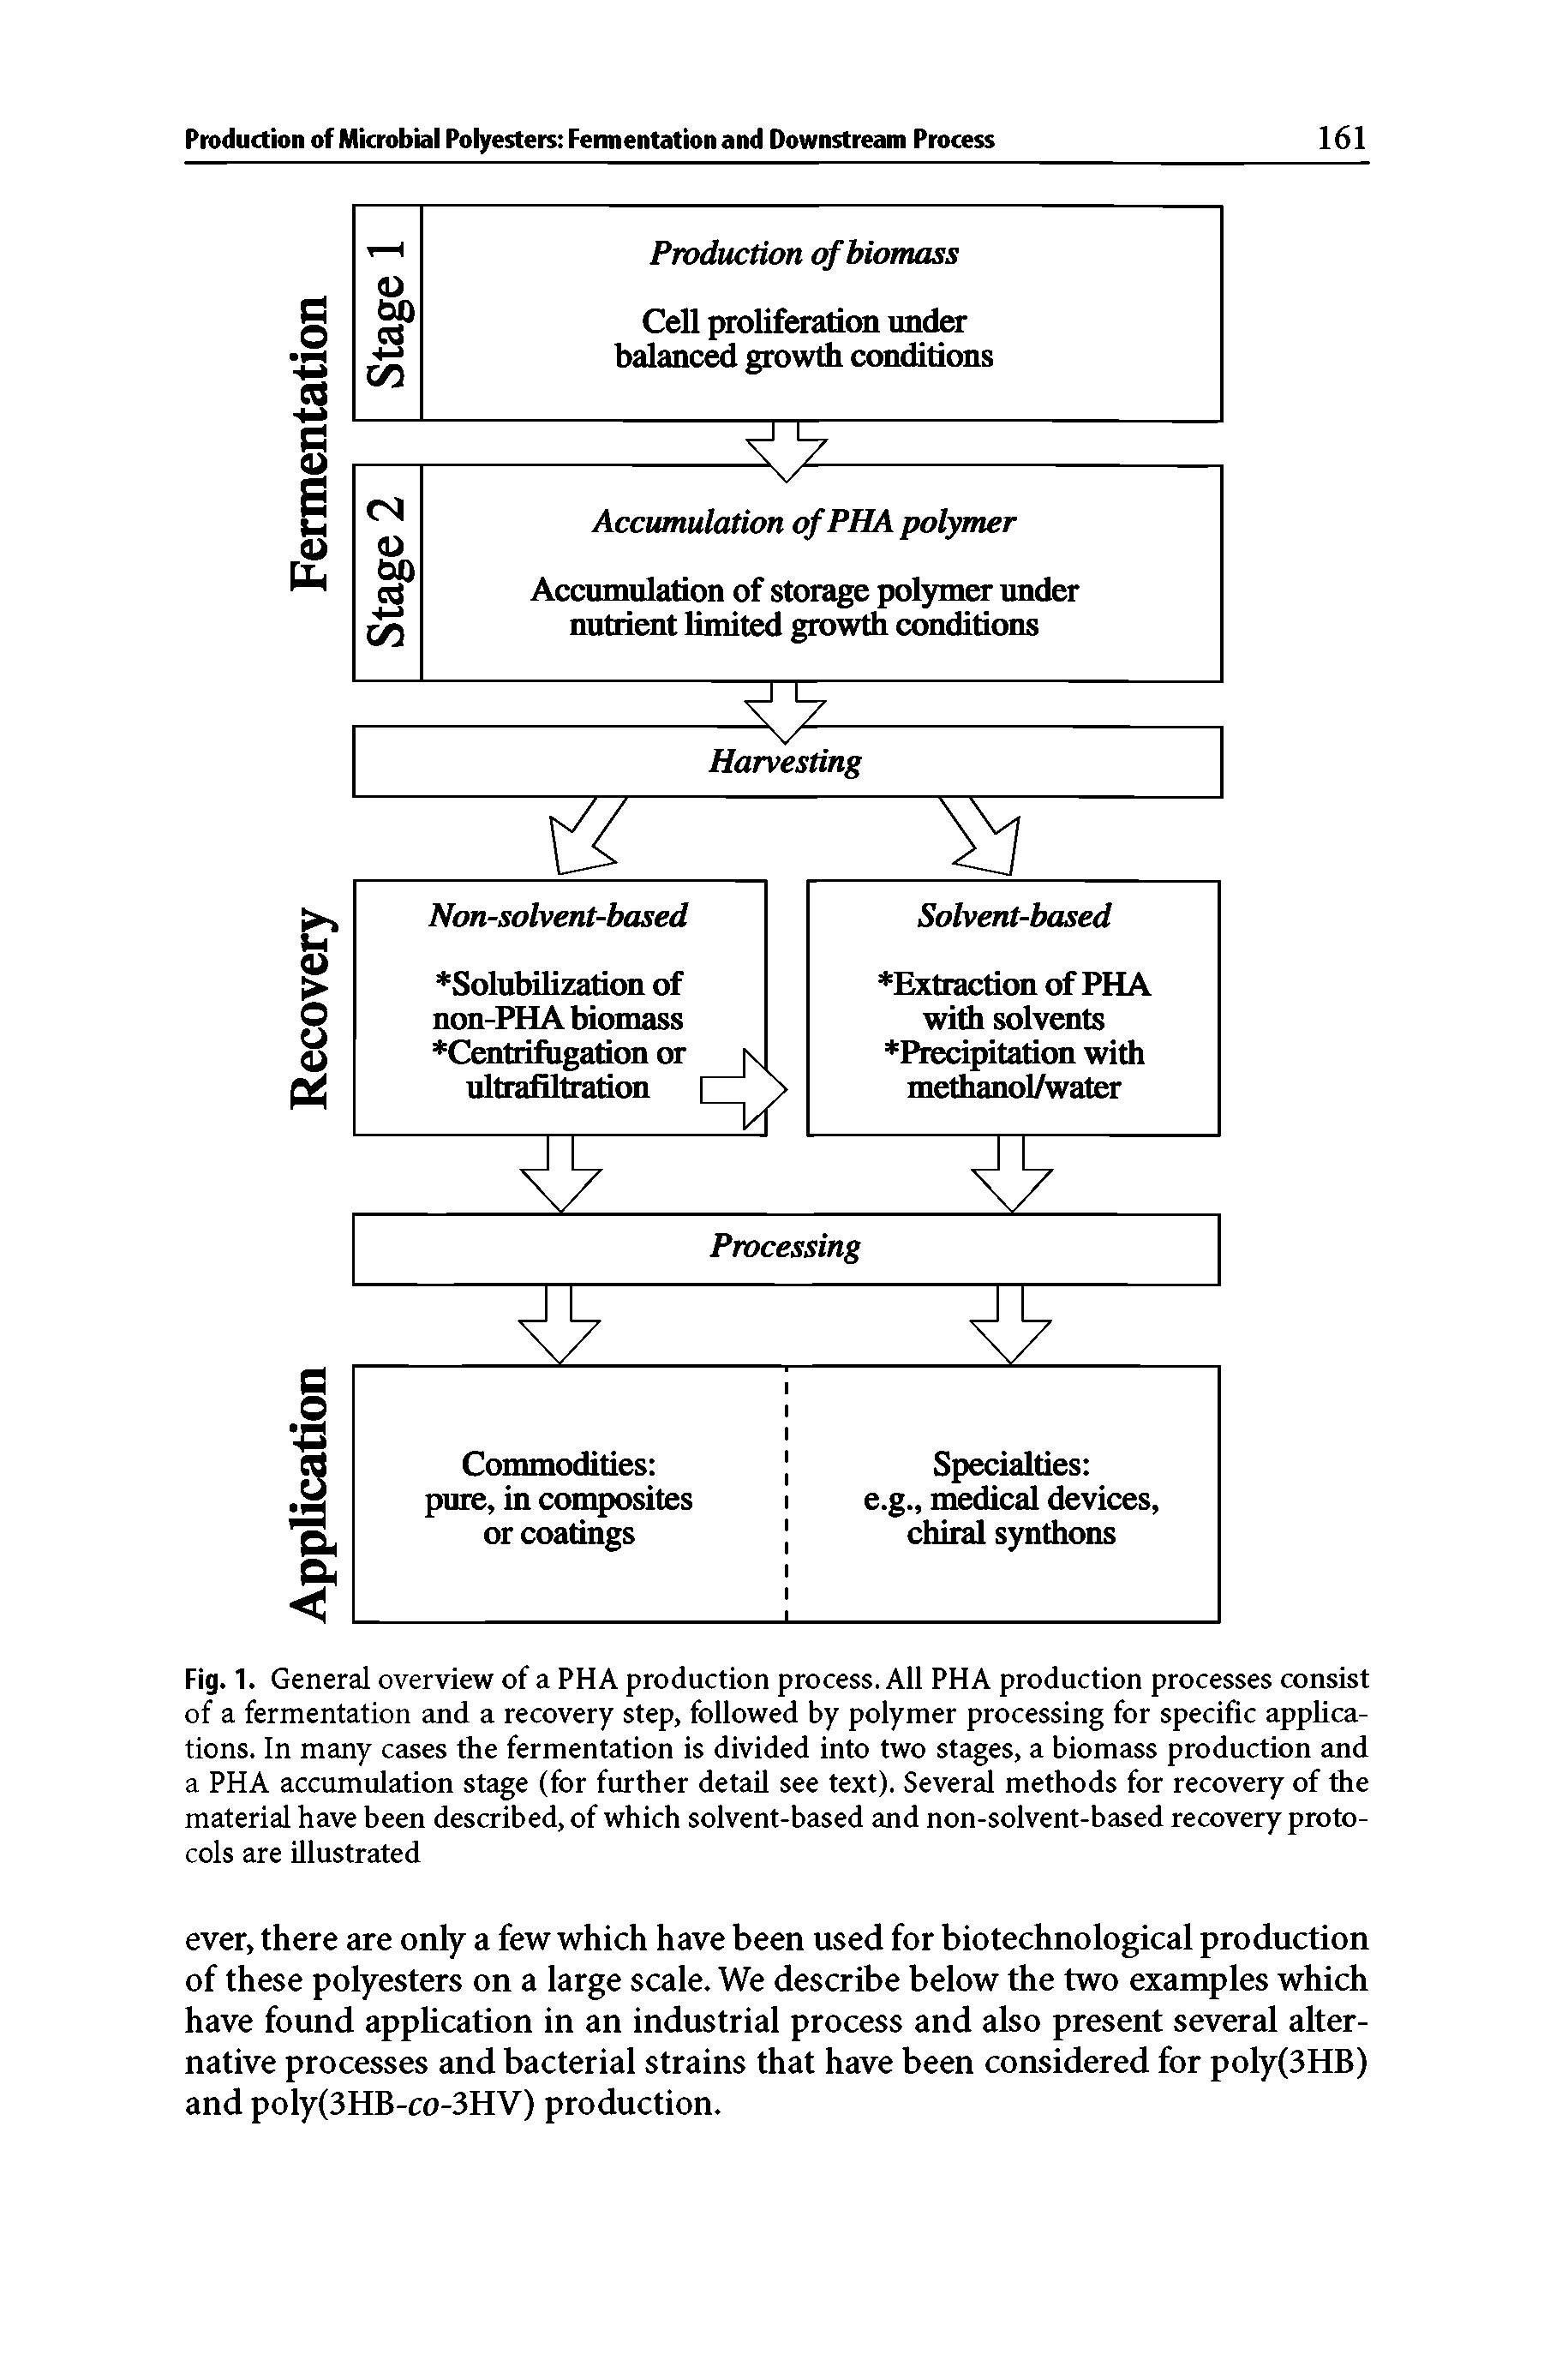 Fig. 1. General overview of a PHA production process. All PHA production processes consist of a fermentation and a recovery step, followed by polymer processing for specific applications. In many cases the fermentation is divided into two stages, a biomass production and a PHA accumulation stage (for further detail see text). Several methods for recovery of the material have been described, of which solvent-based and non-solvent-based recovery protocols are illustrated...